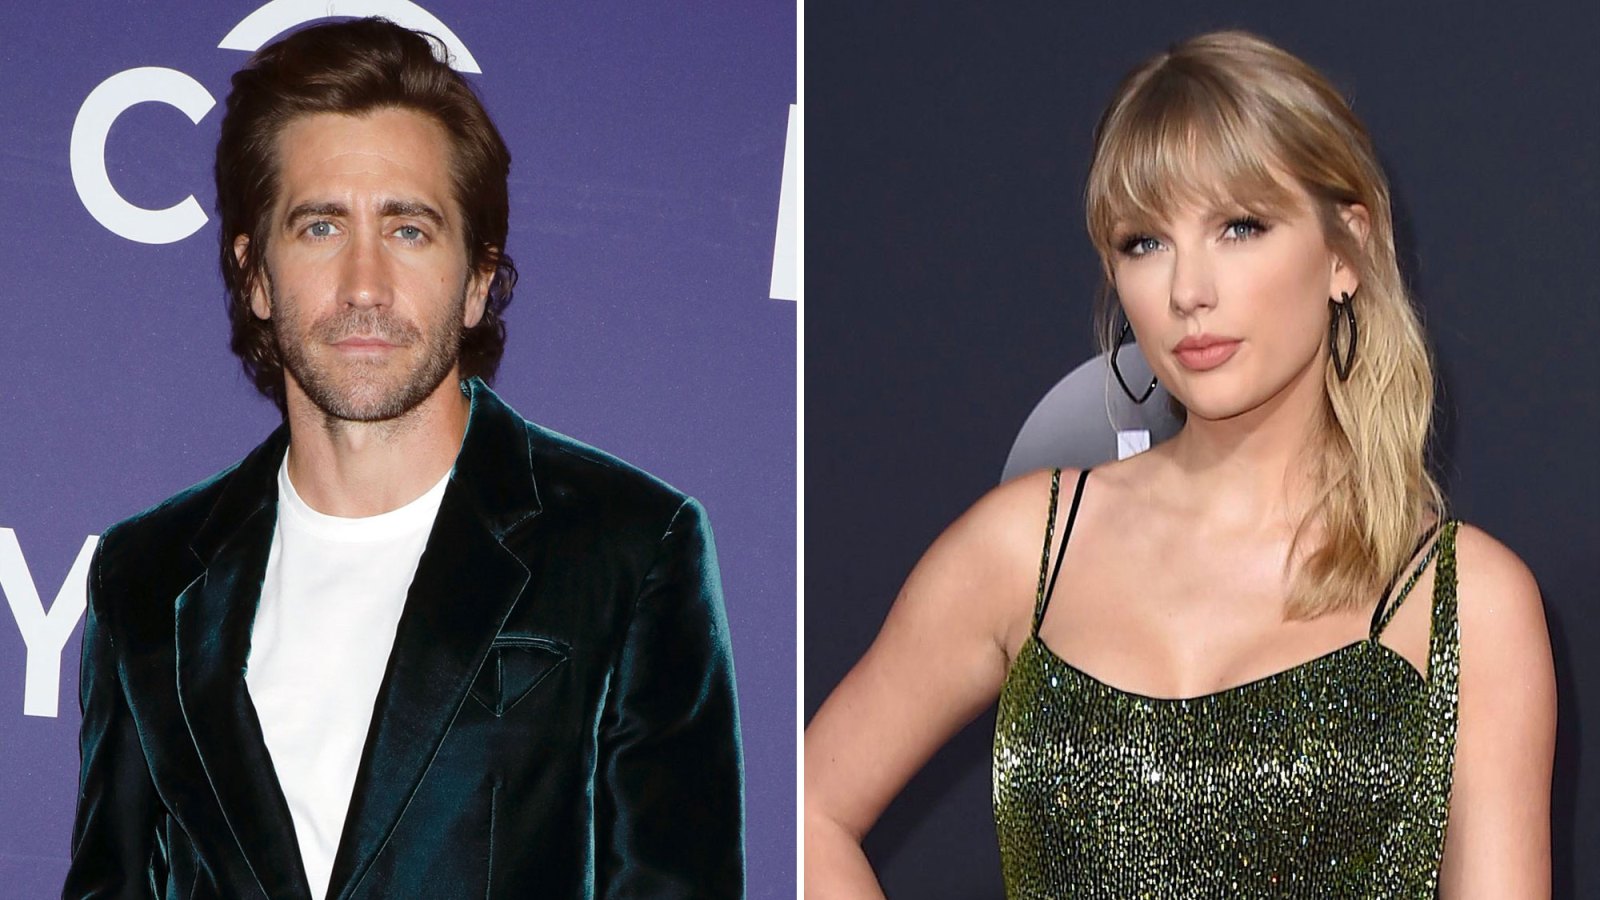 Could it Be Fans Are Convinced Jake Gyllenhaal Is Trolling Taylor Swift’s Red Era